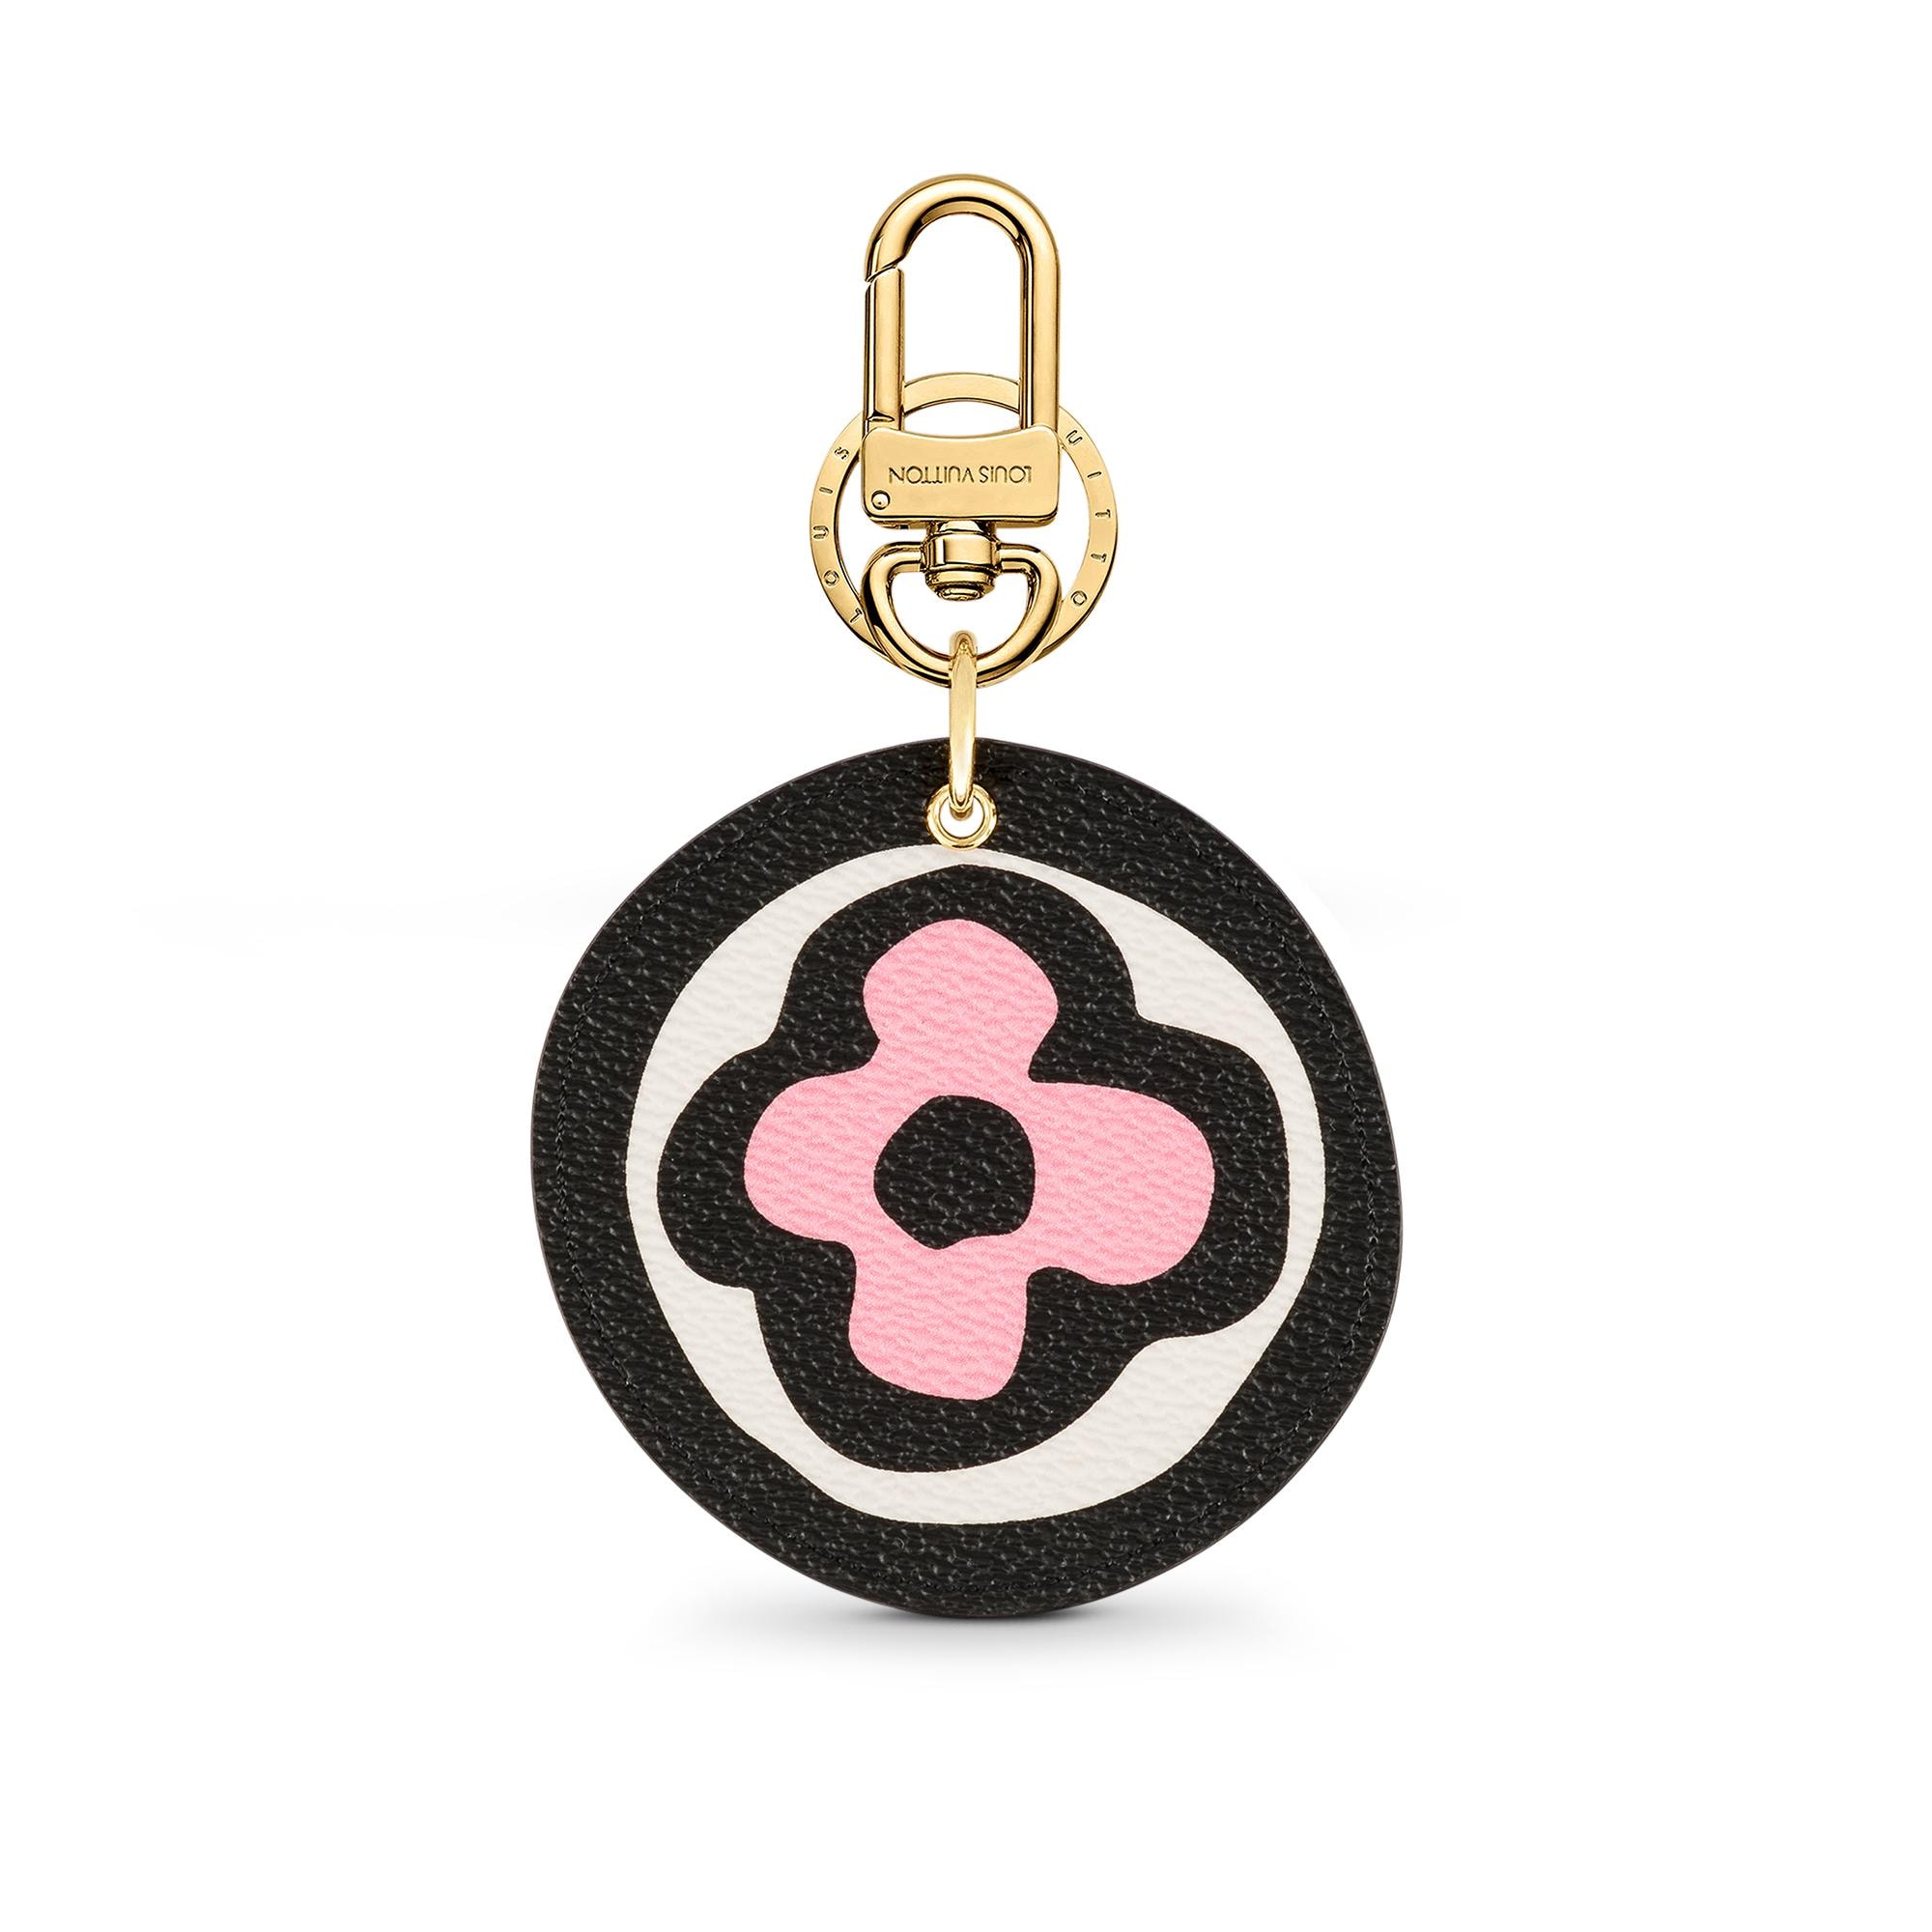 Louis Vuitton Wild at Heart Illustre Bag Charm and Key Holder in Black – Accessories MP3070